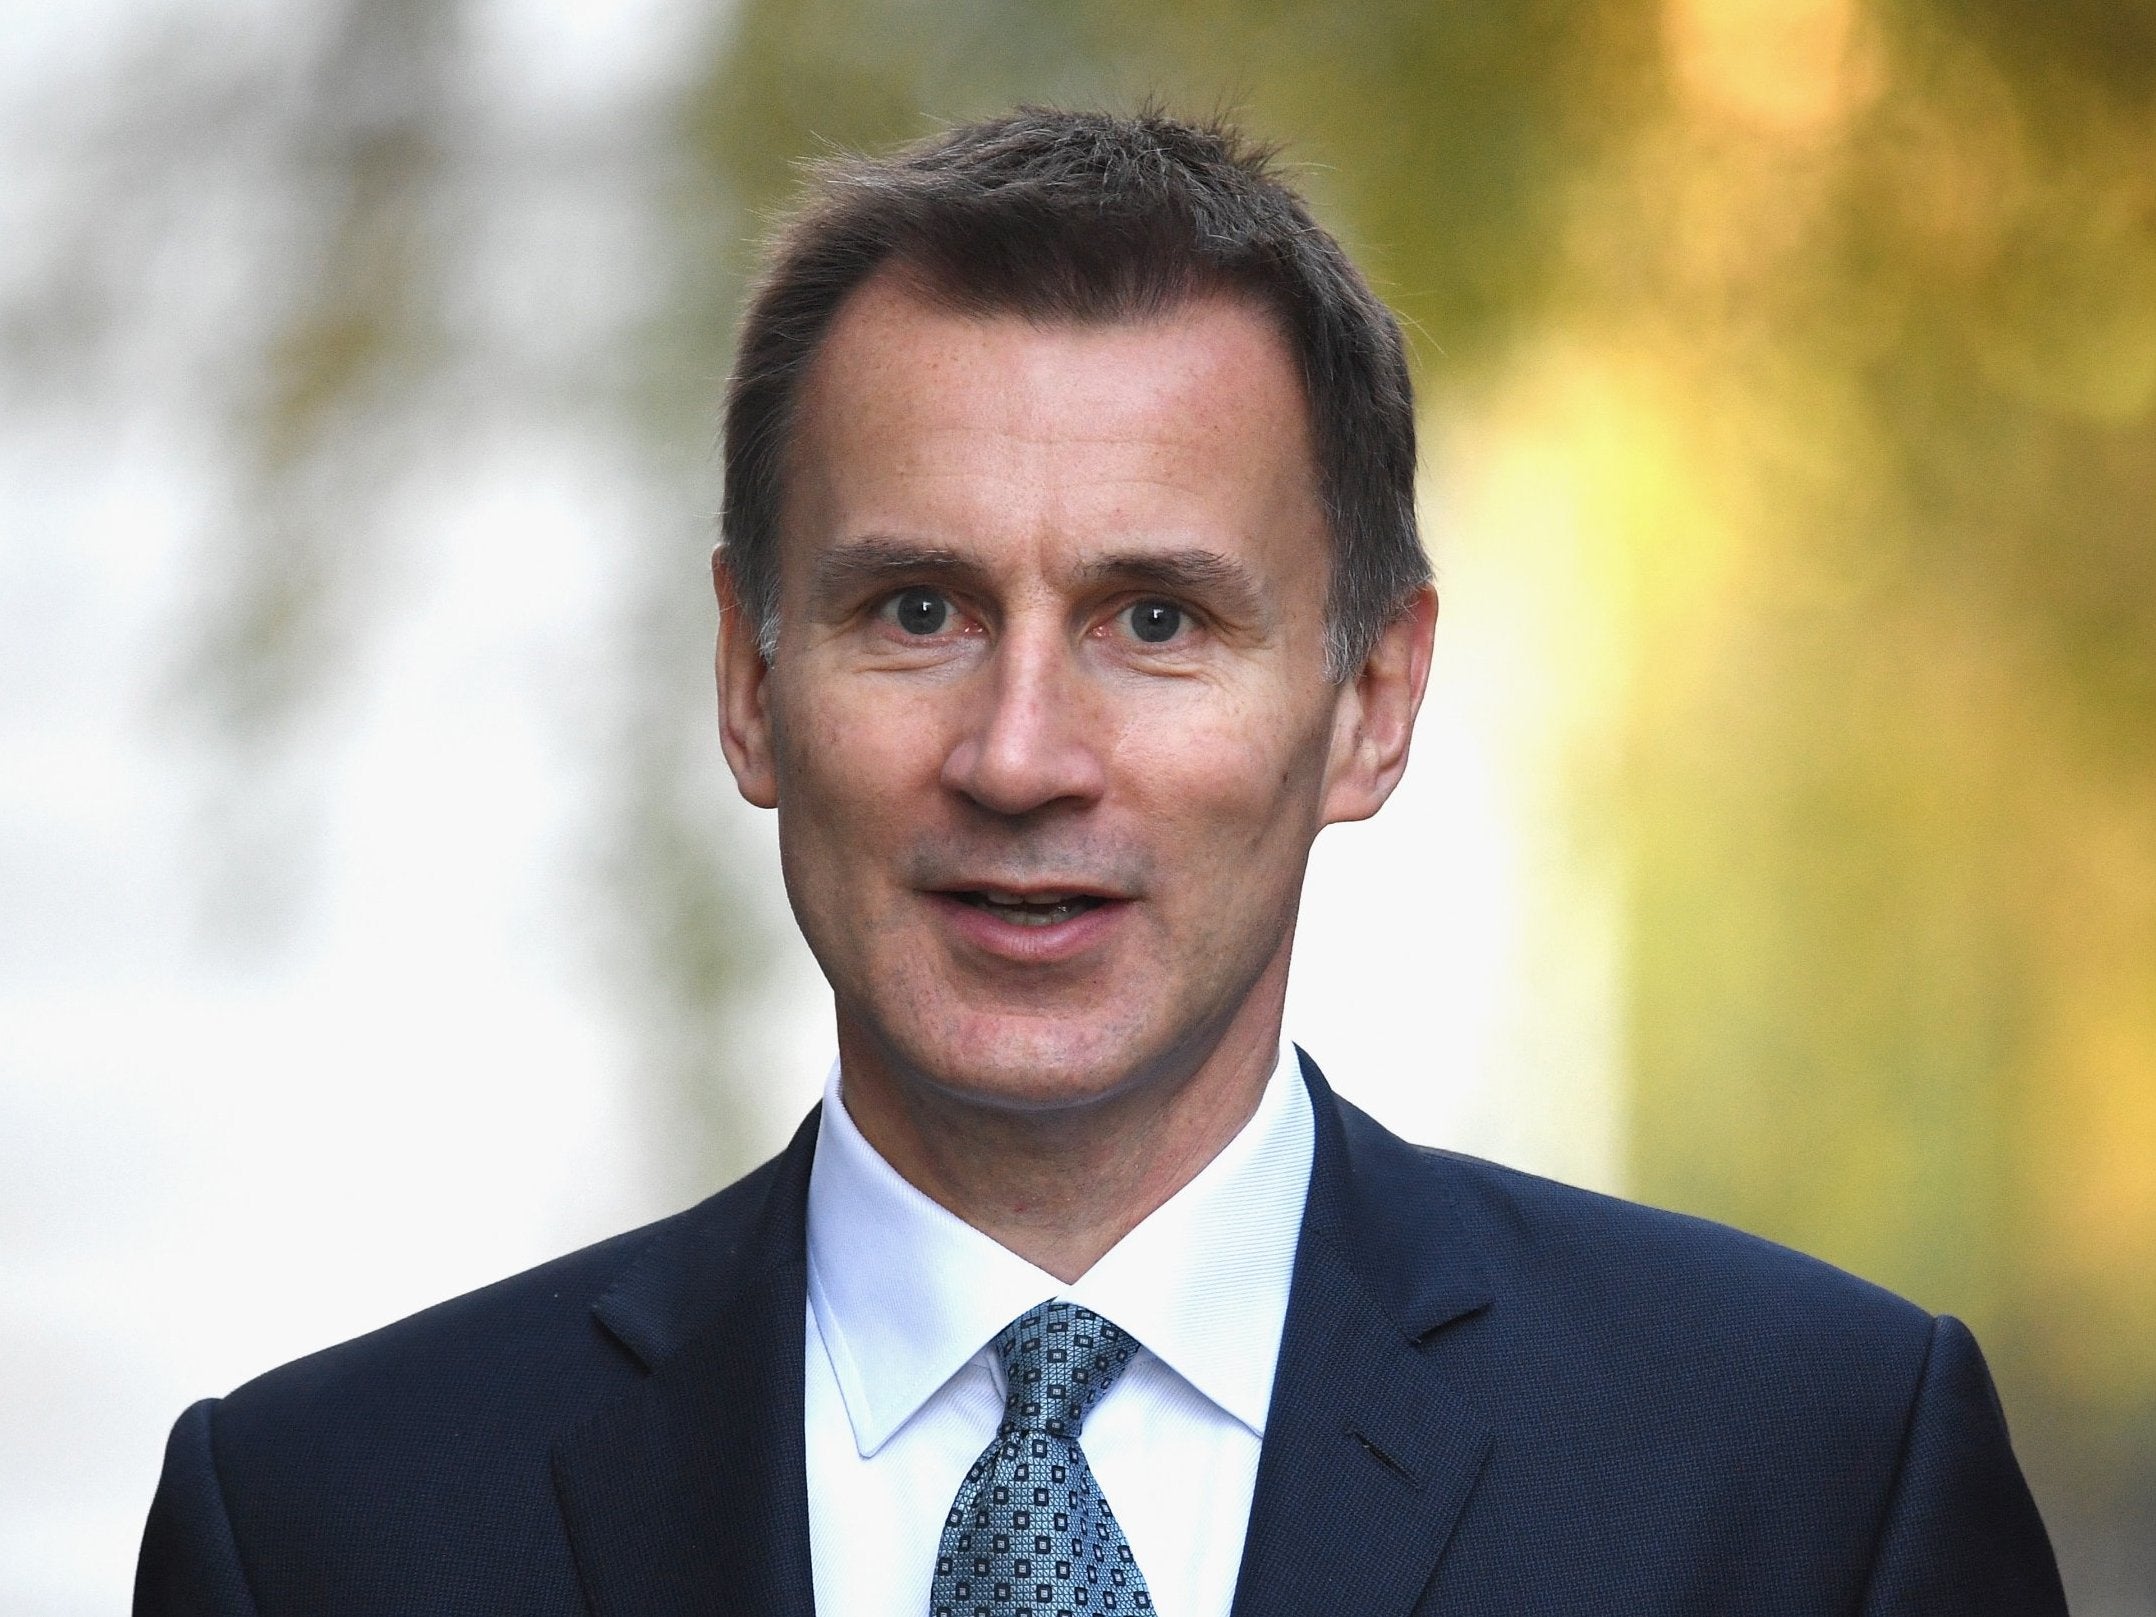 Mr Hunt is the first western foreign minister to visit the country since Donald Trump abandoned the Iran nuclear deal